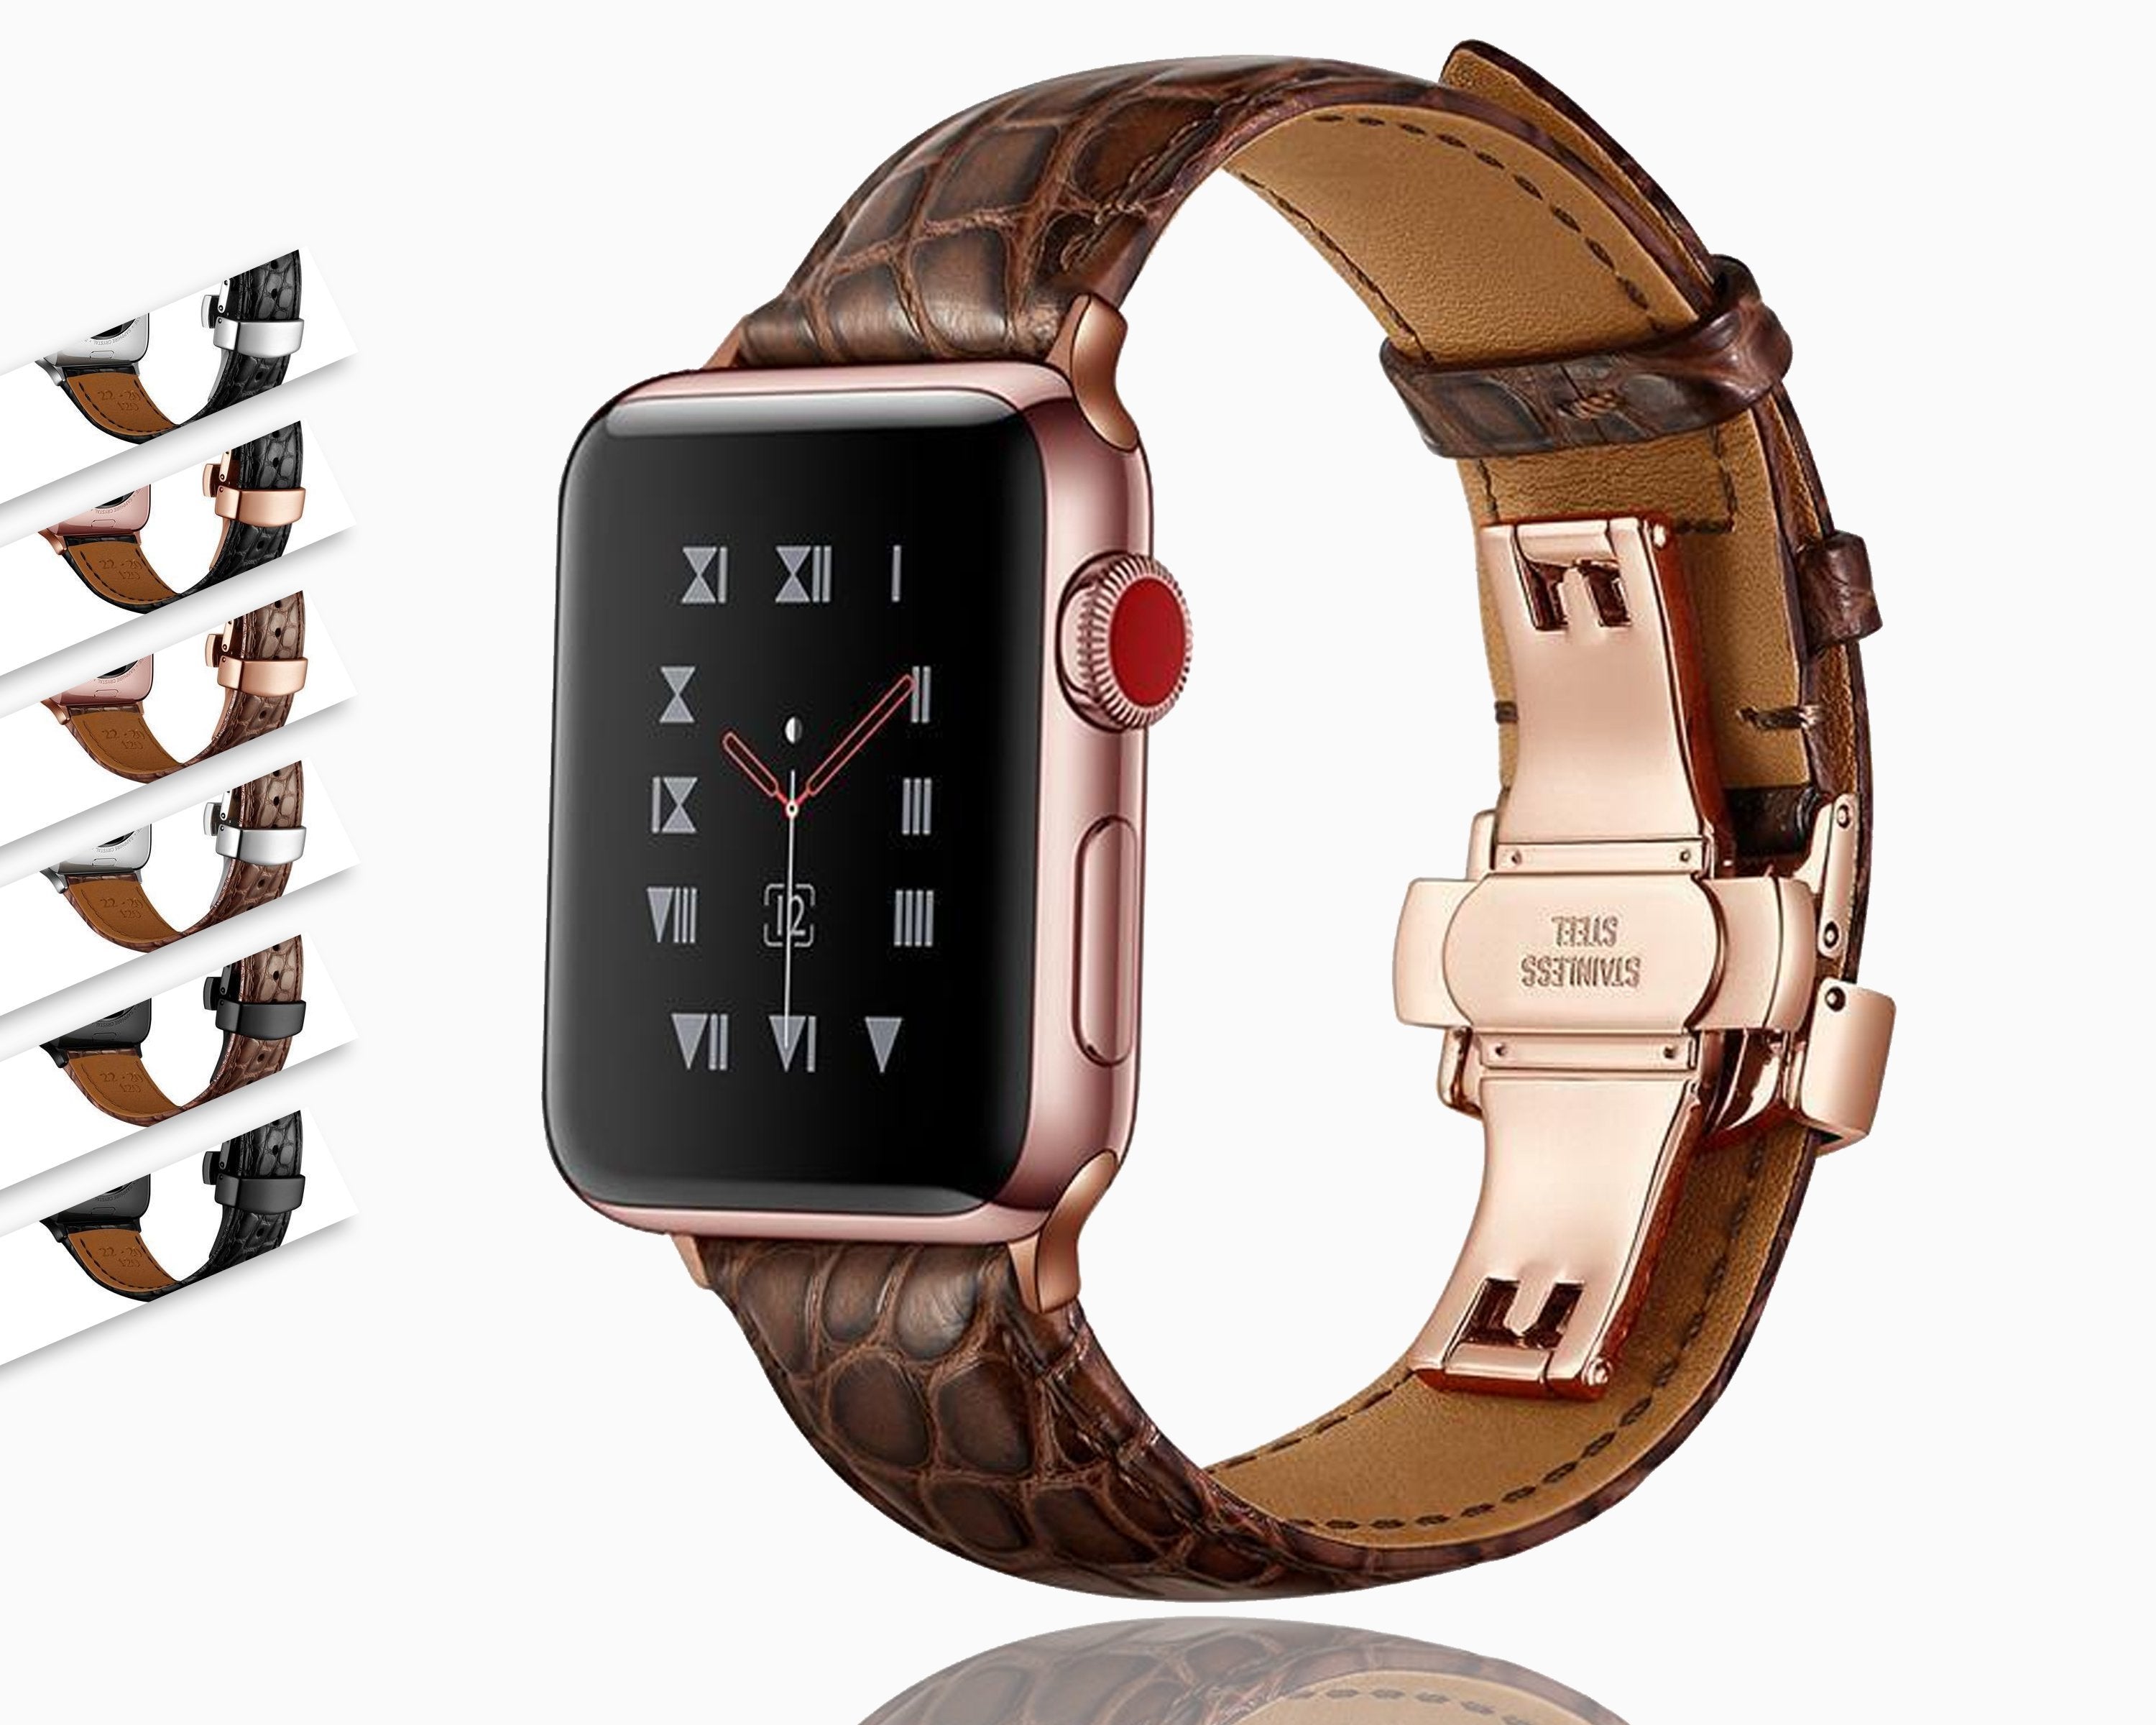 Apple Watch Leather Band ™ Pink Ostrich Leather Strap